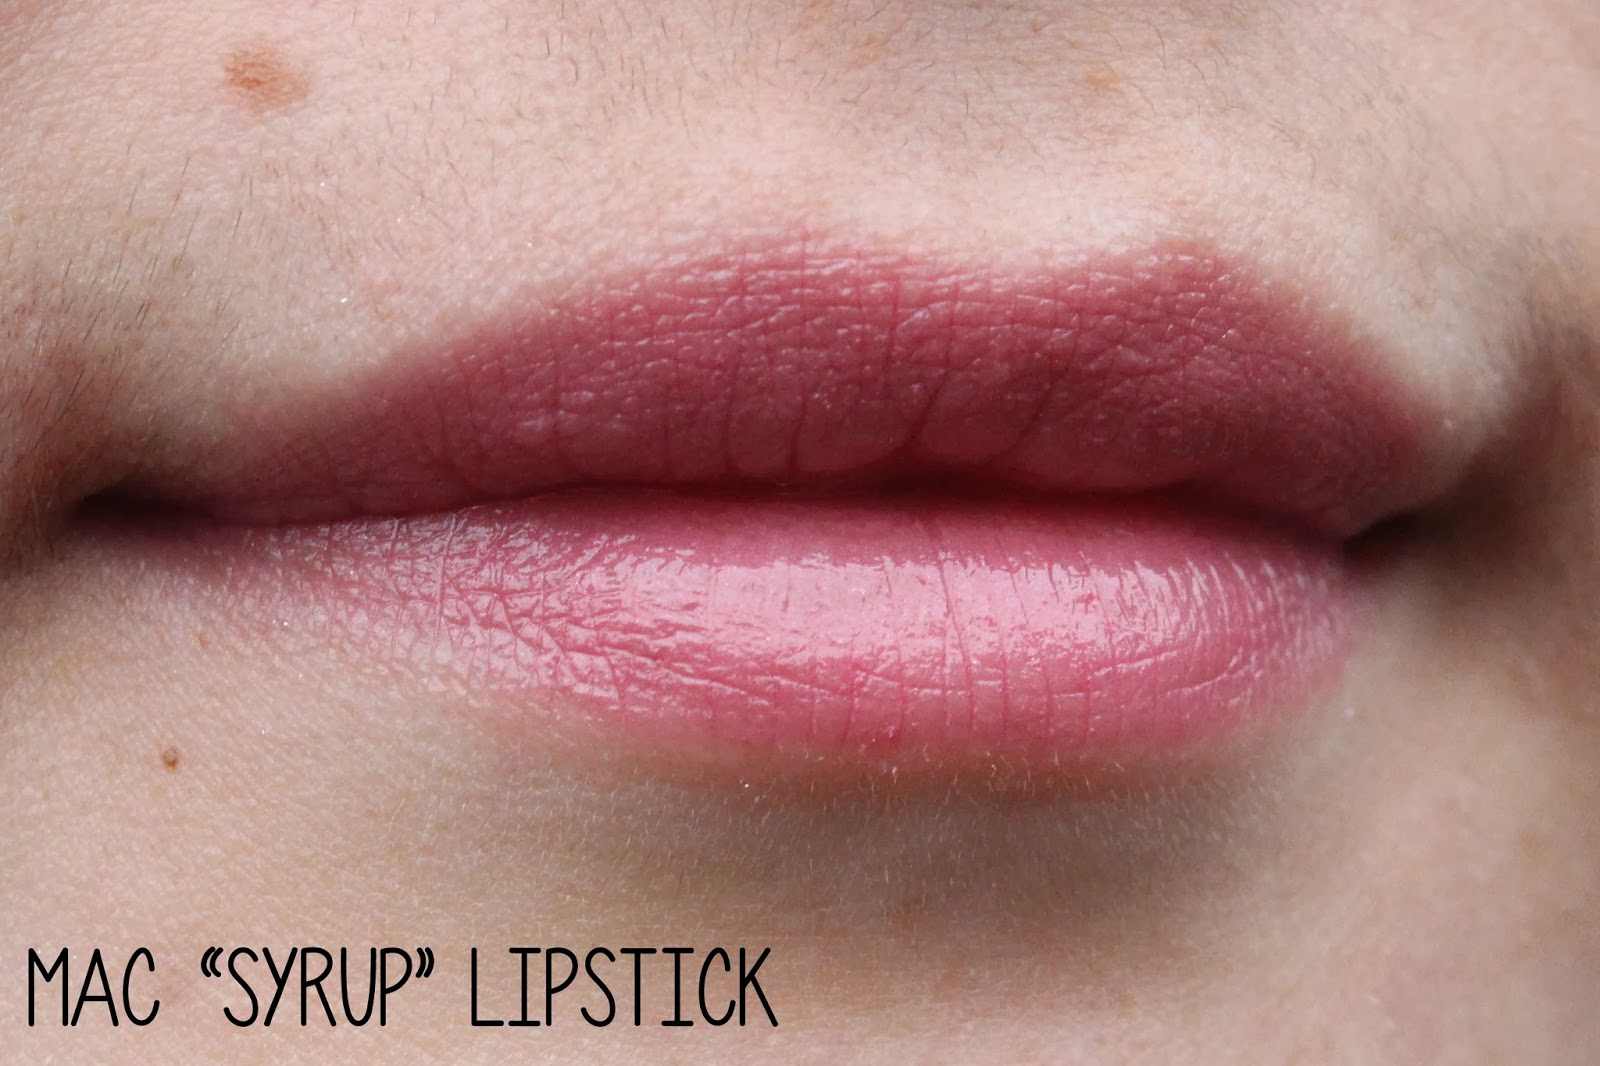 MAC "Syrup" Lipstick Swatch + Review.